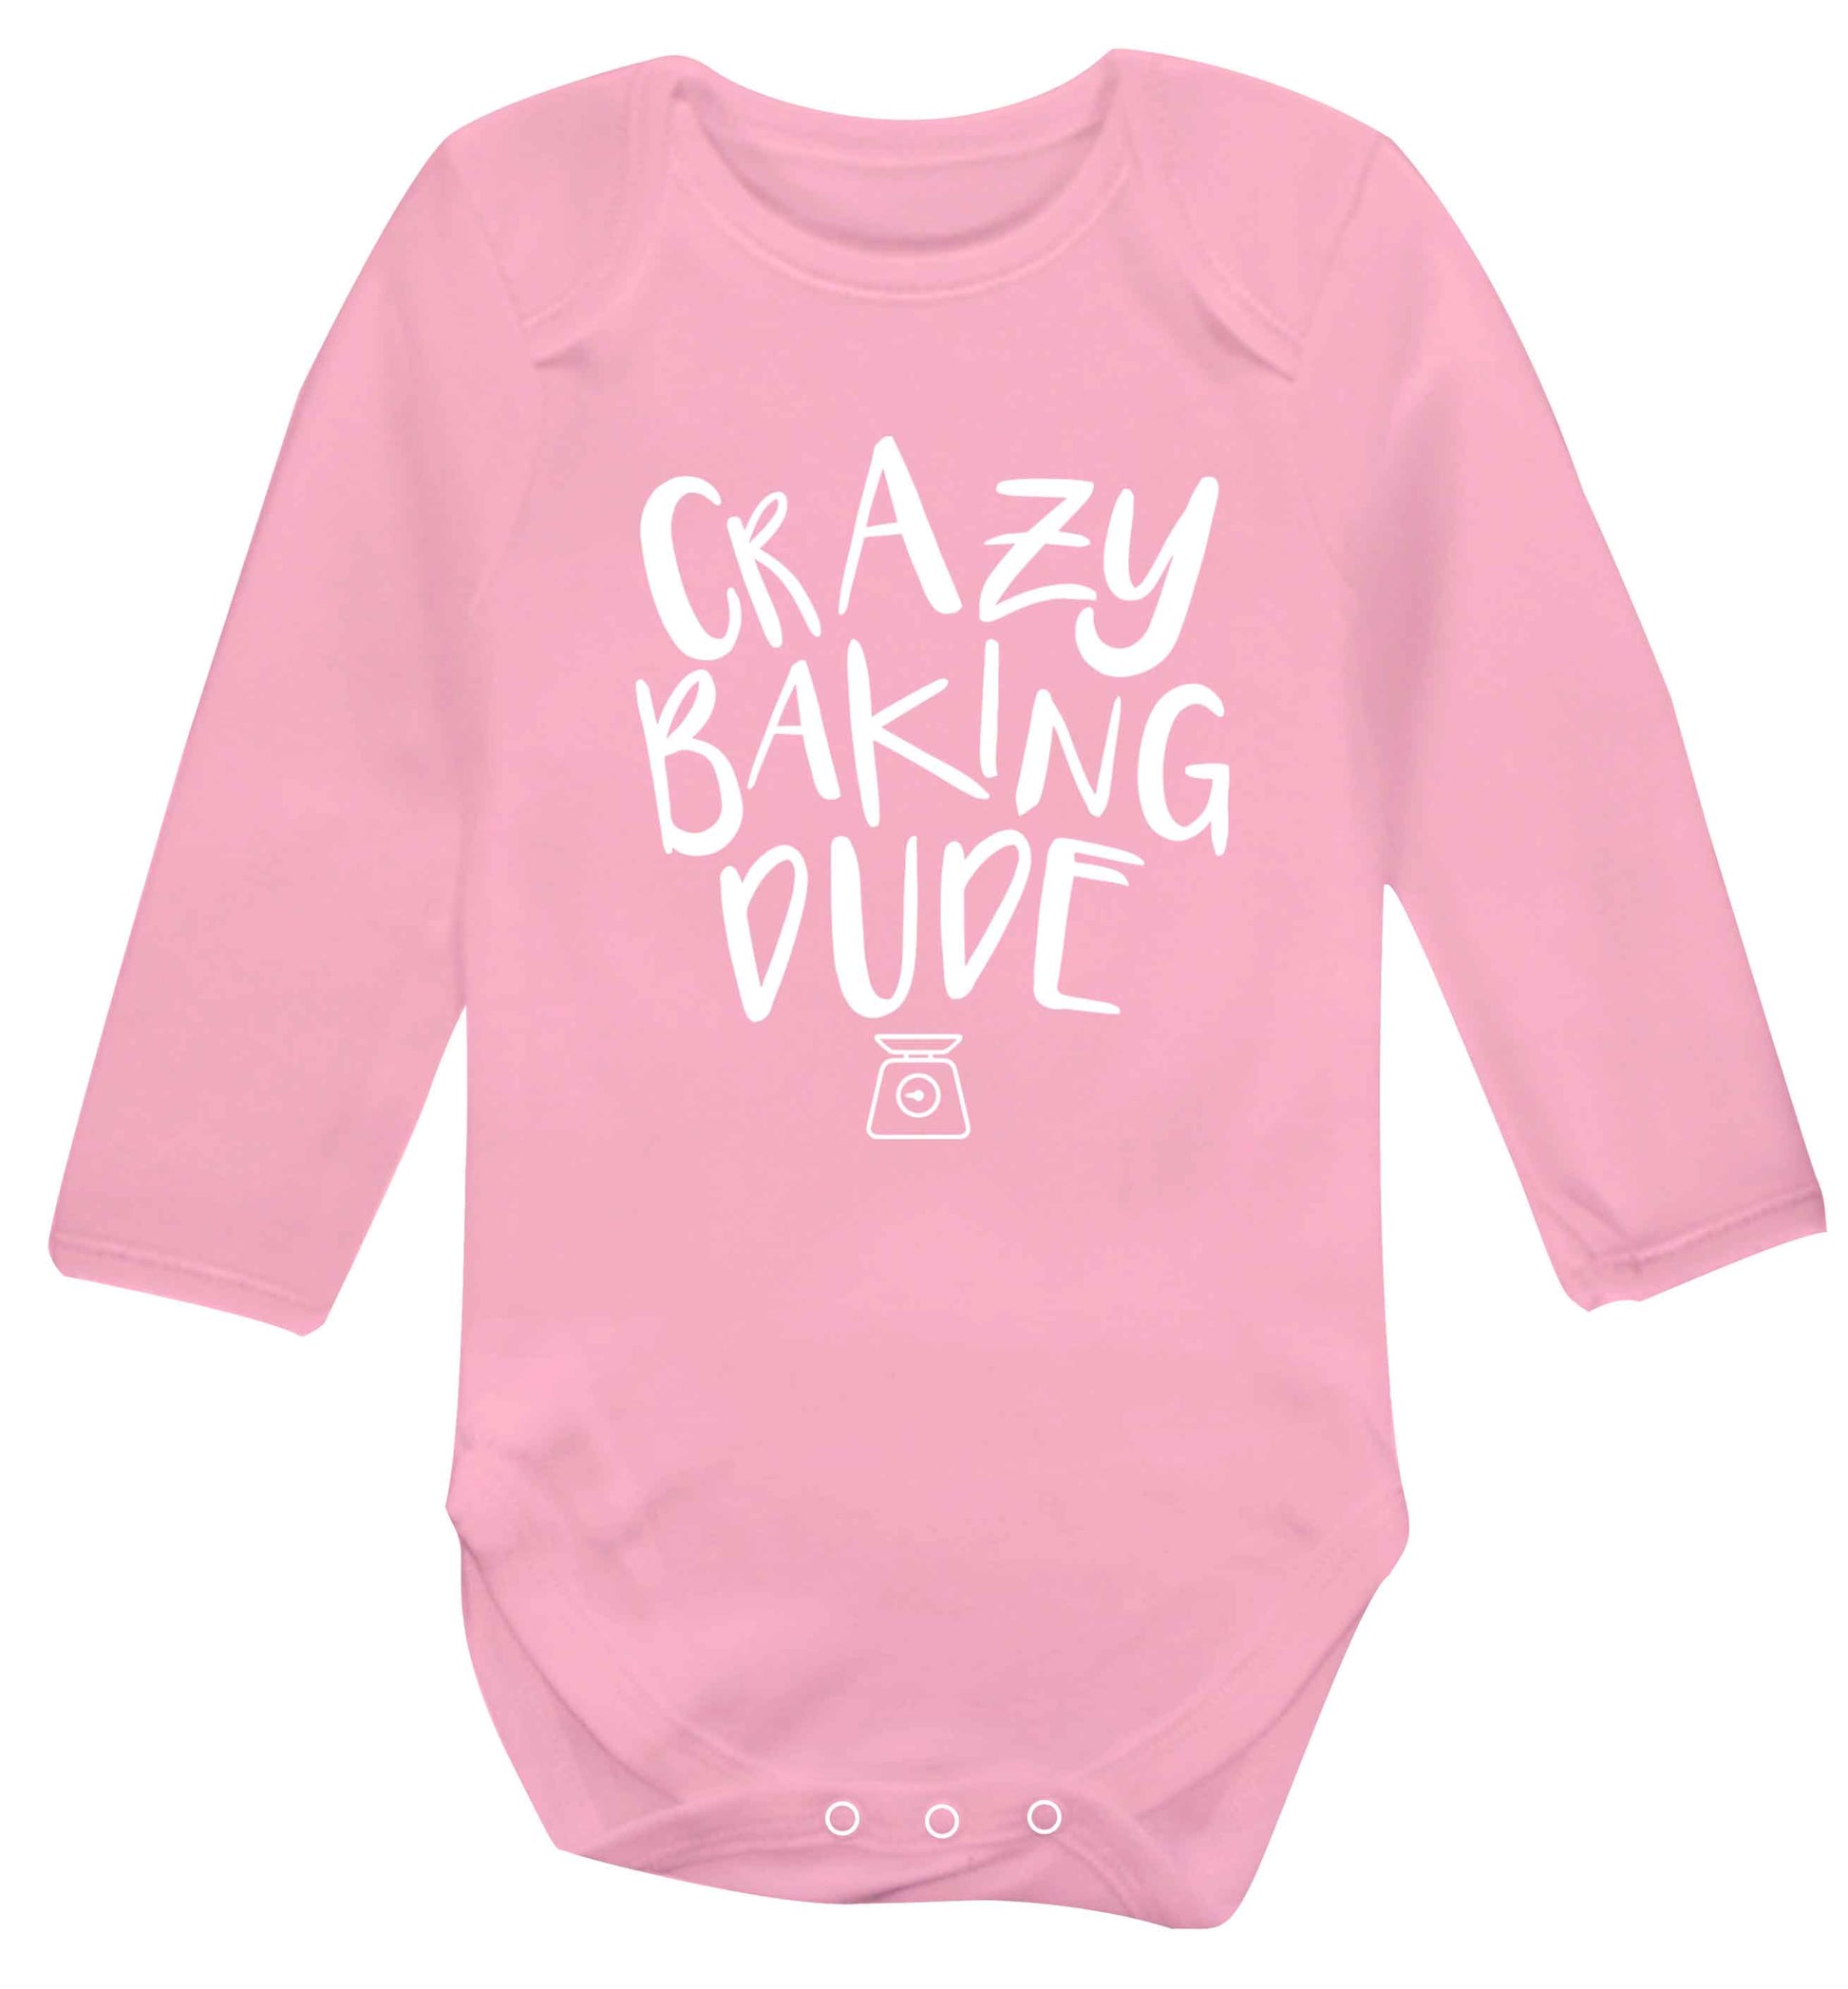 Crazy baking dude Baby Vest long sleeved pale pink 6-12 months